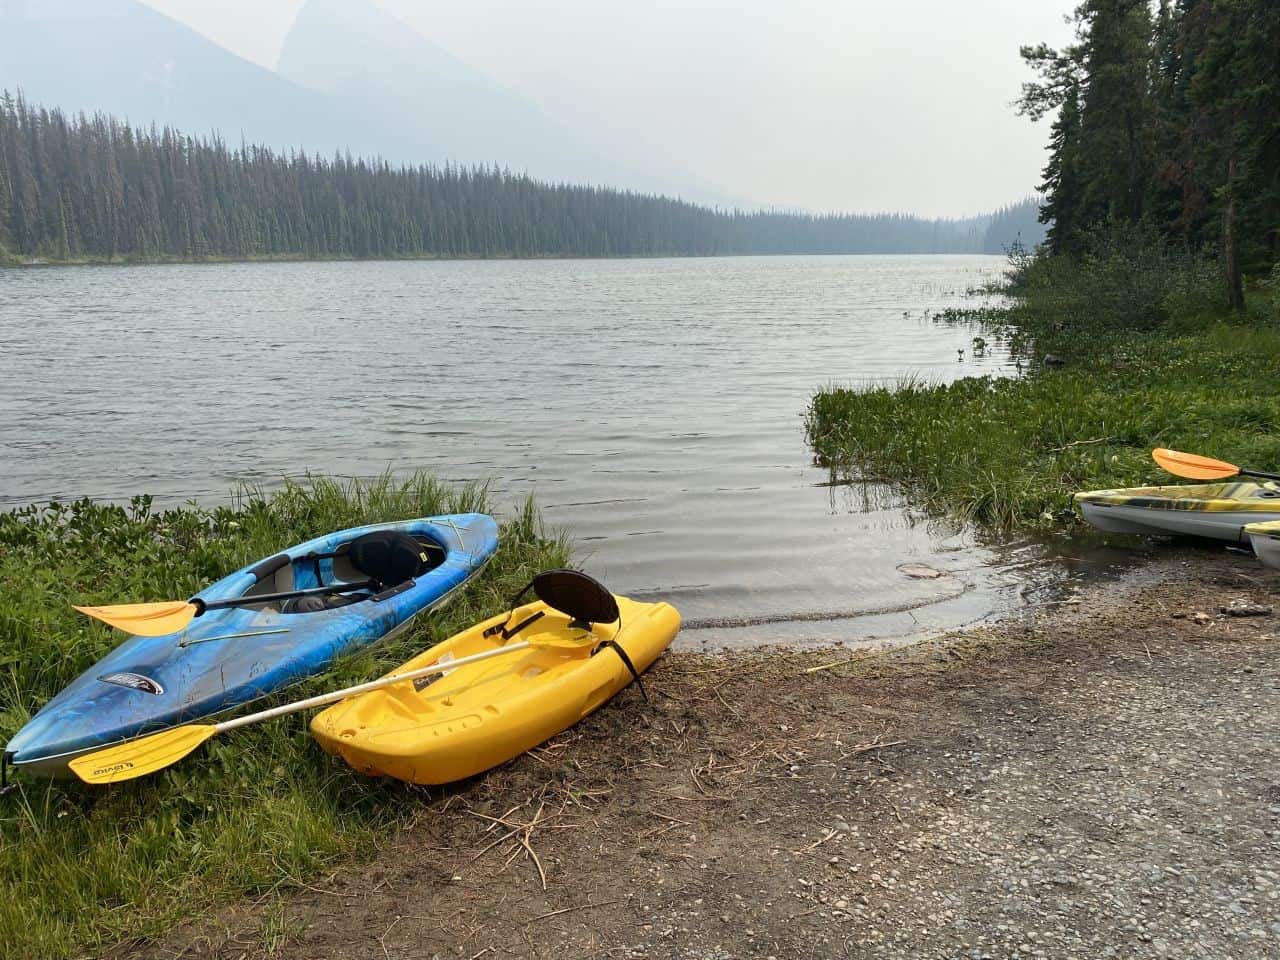 The Honeymoon Lake Campground in Jasper National Park is a great spot on the lake. Although, the water is cold you can swim in it if you are brace enough. Better yet, why not stay dry and go for a kayak.